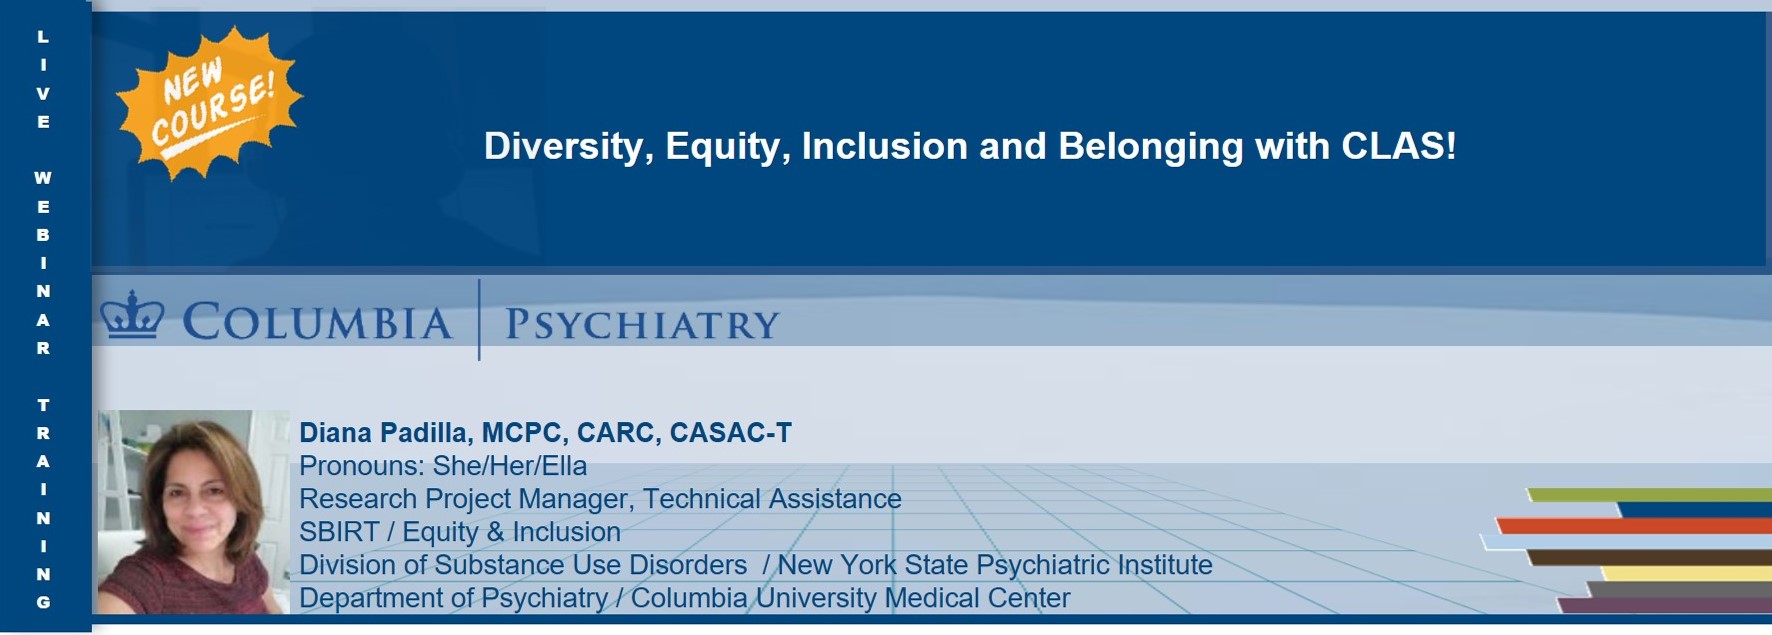 Diversity, Equity, Inclusion and Belonging with CLAS)